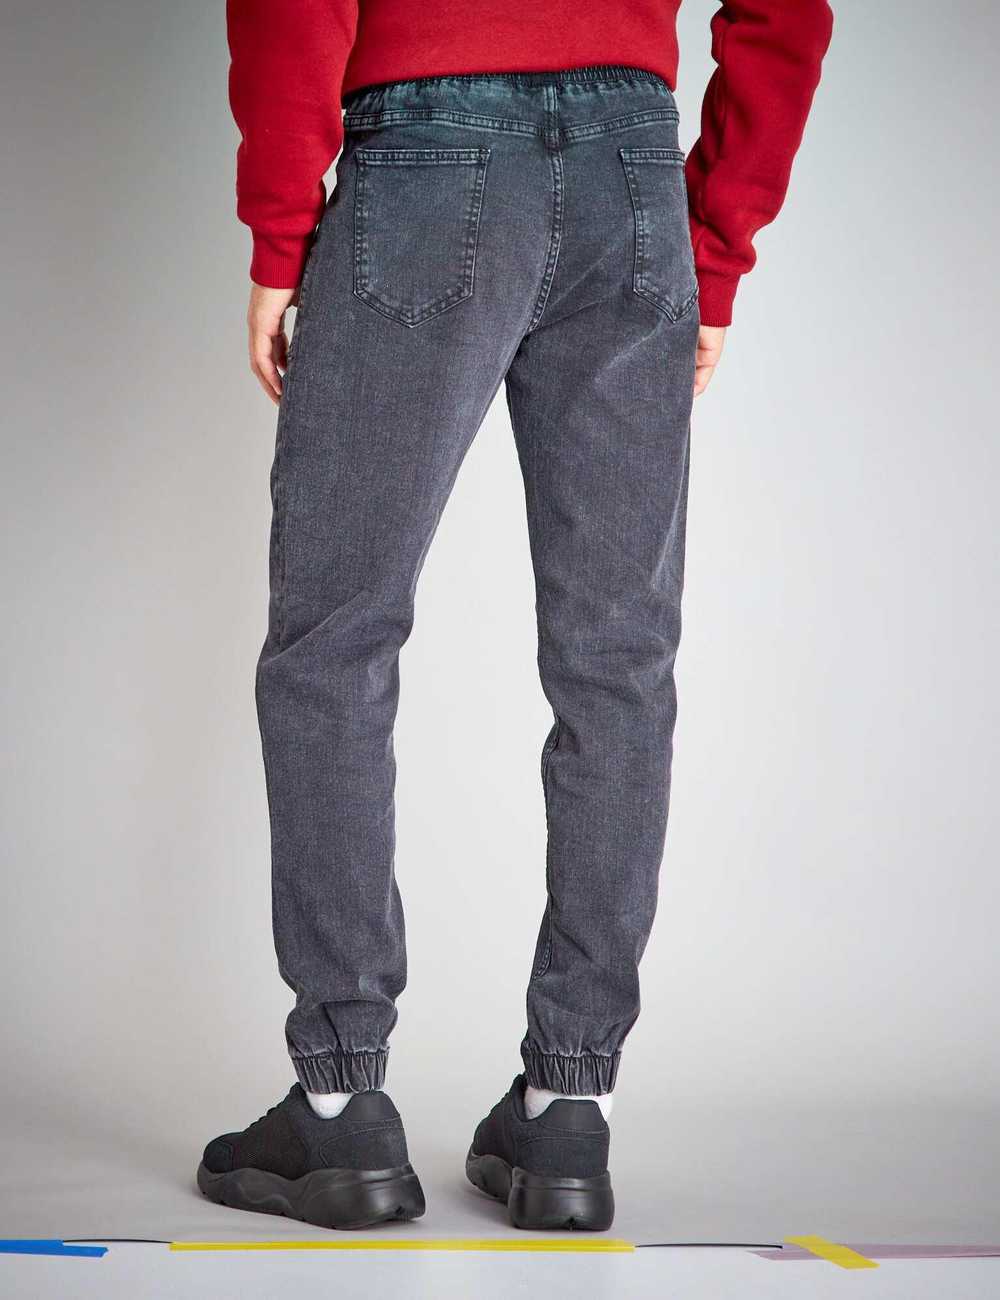 Buy Jogger-style jeans with elasticated waist Online in Dubai & the  UAE